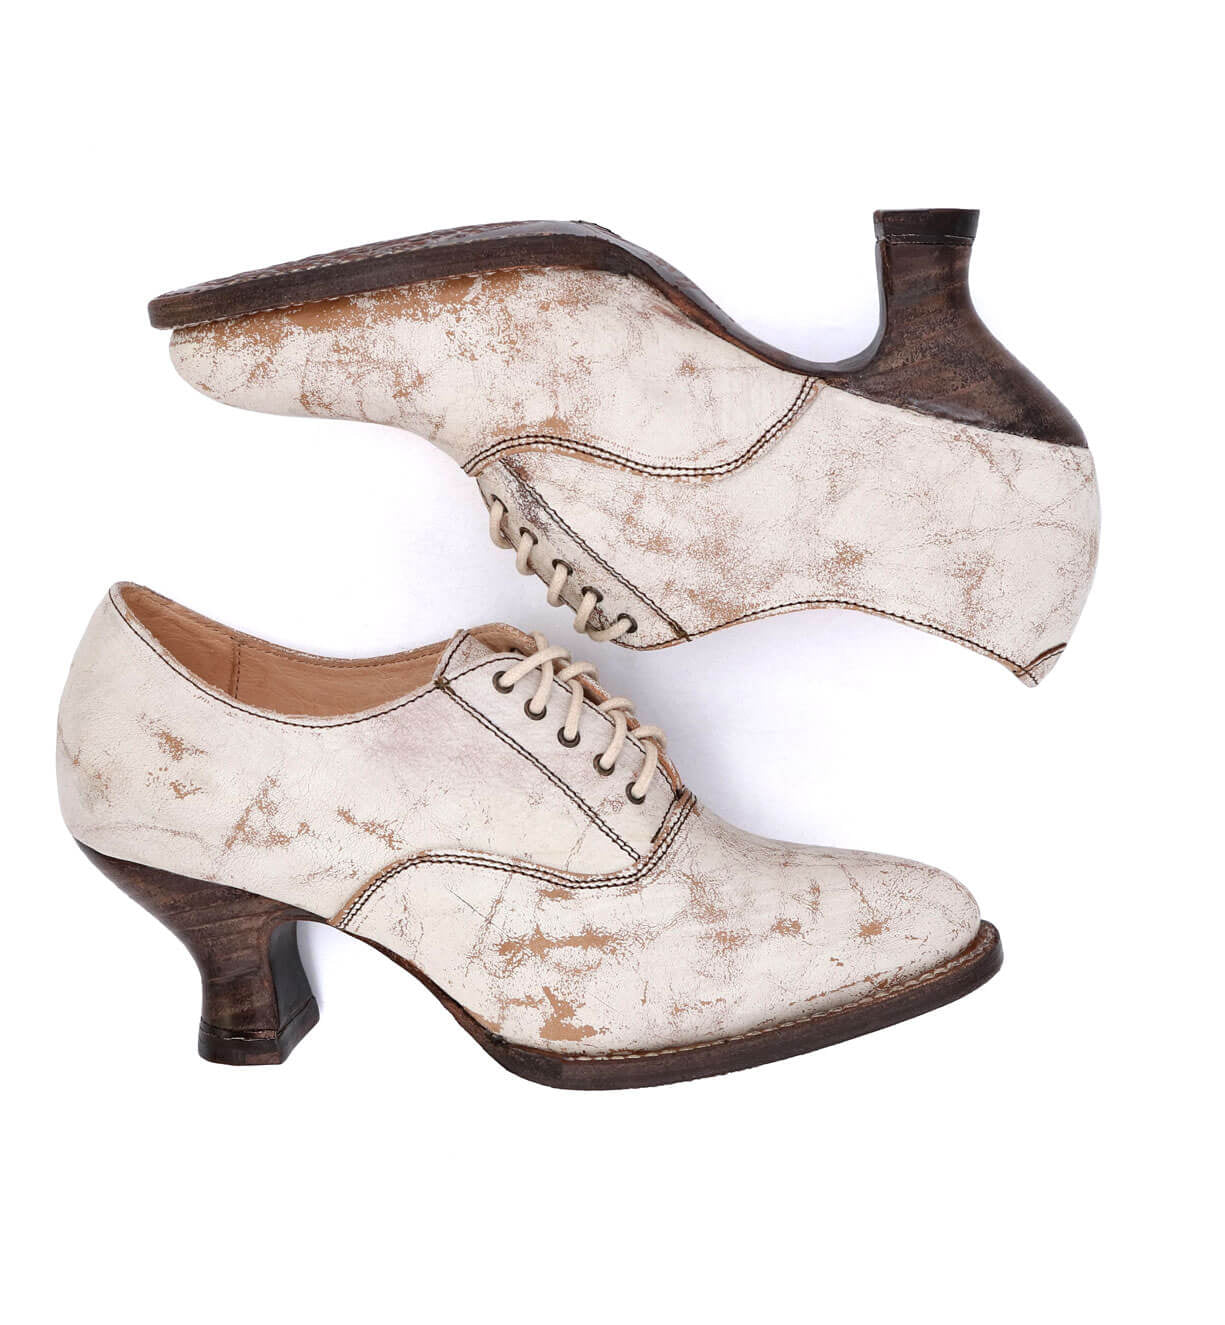 A pair of white Janet oxford shoes with a neutral look on a white background, by Oak Tree Farms.